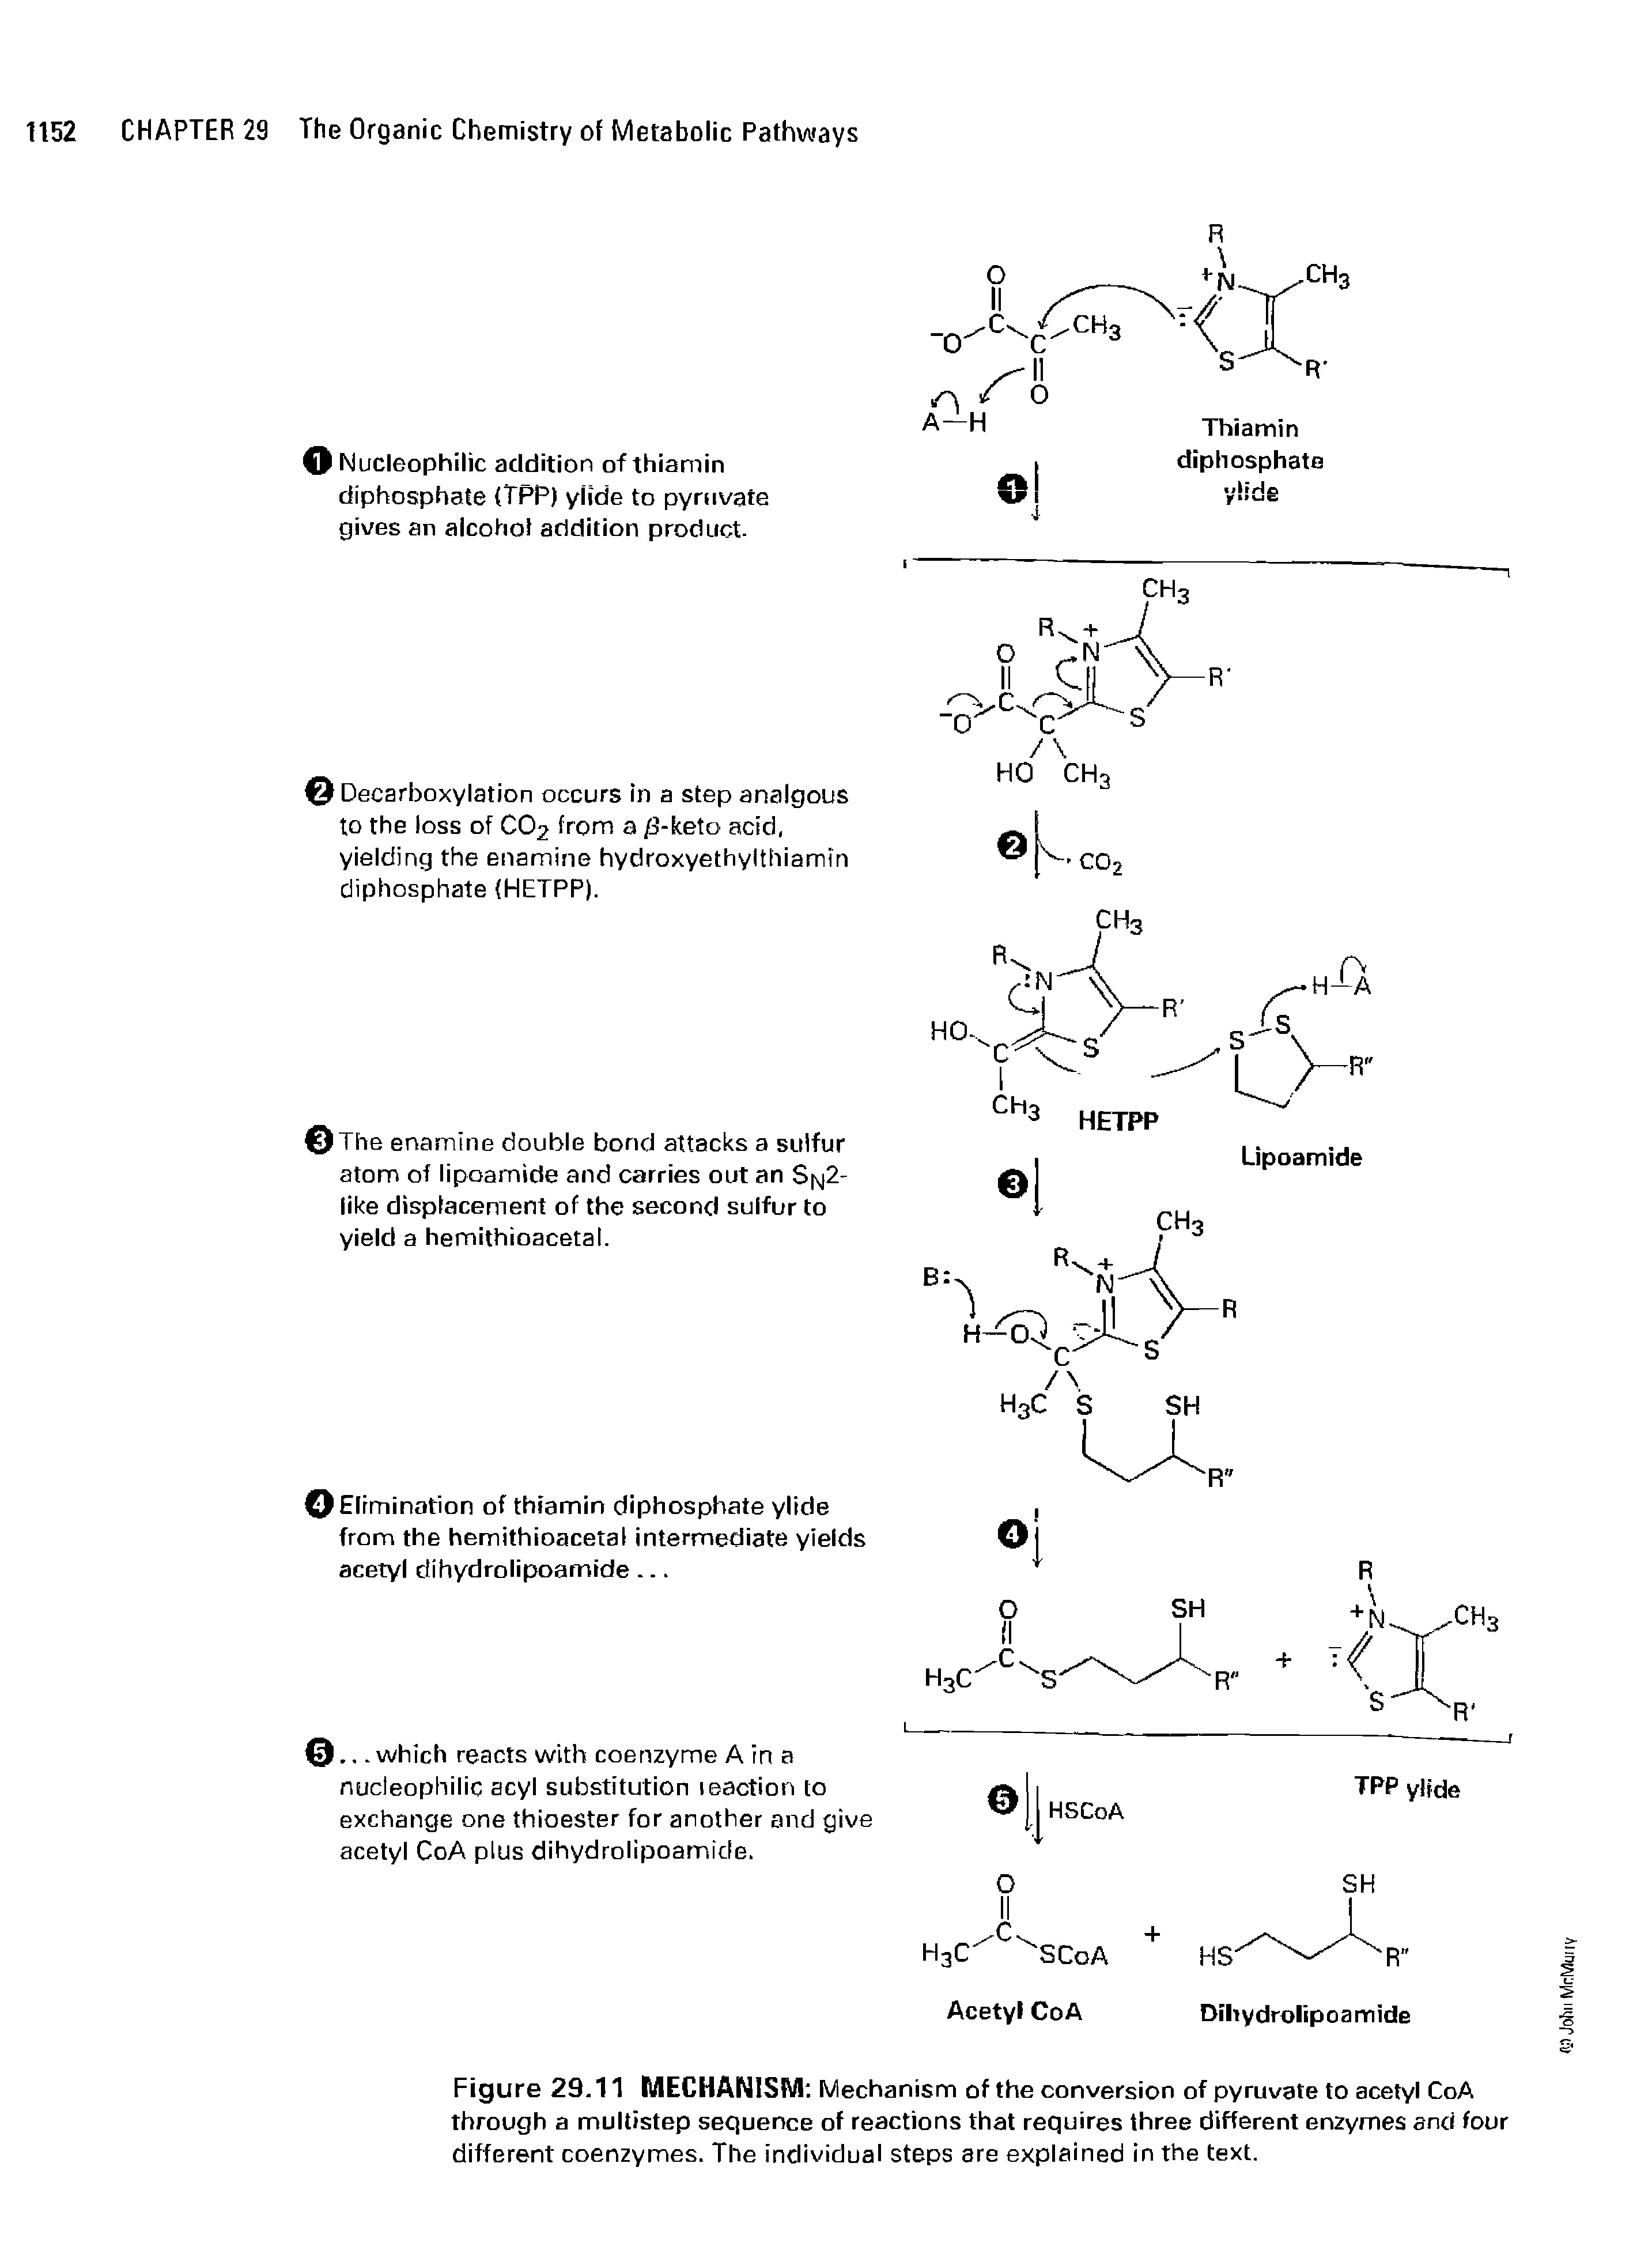 Figure 29.11 MECHANISM Mechanism of the conversion of pyruvate to acetyl CoA through a multistep sequence of reactions that requires three different enzymes and four different coenzymes. The individual steps are explained in the text.